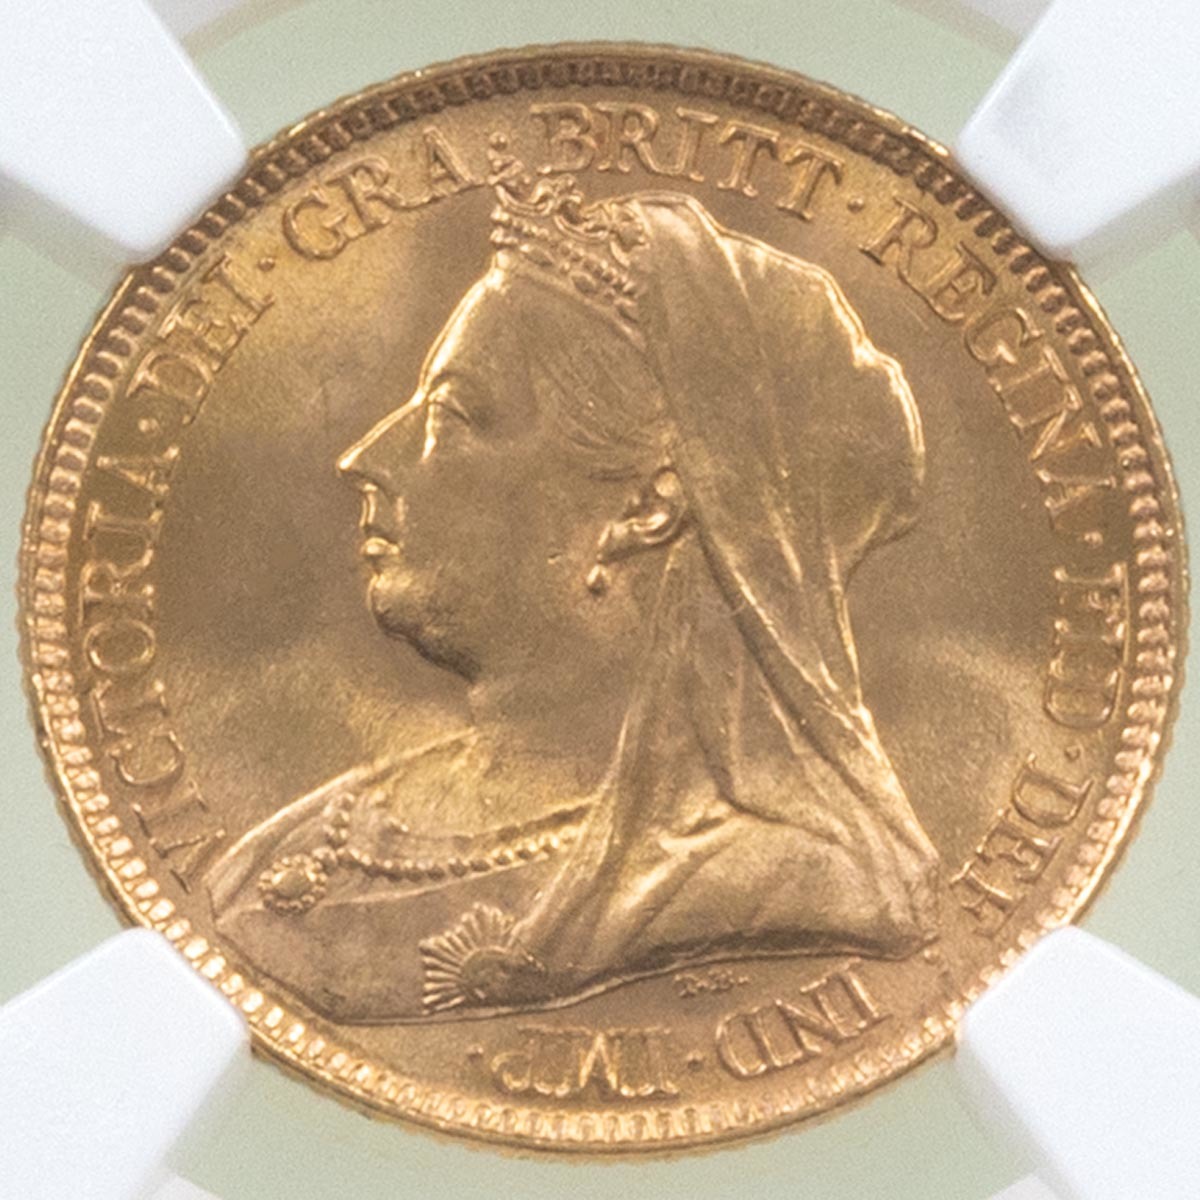 1893 Queen Victoria Gold Half Sovereign London Mint Jubilee Head NGC Graded MS 63 Obverse